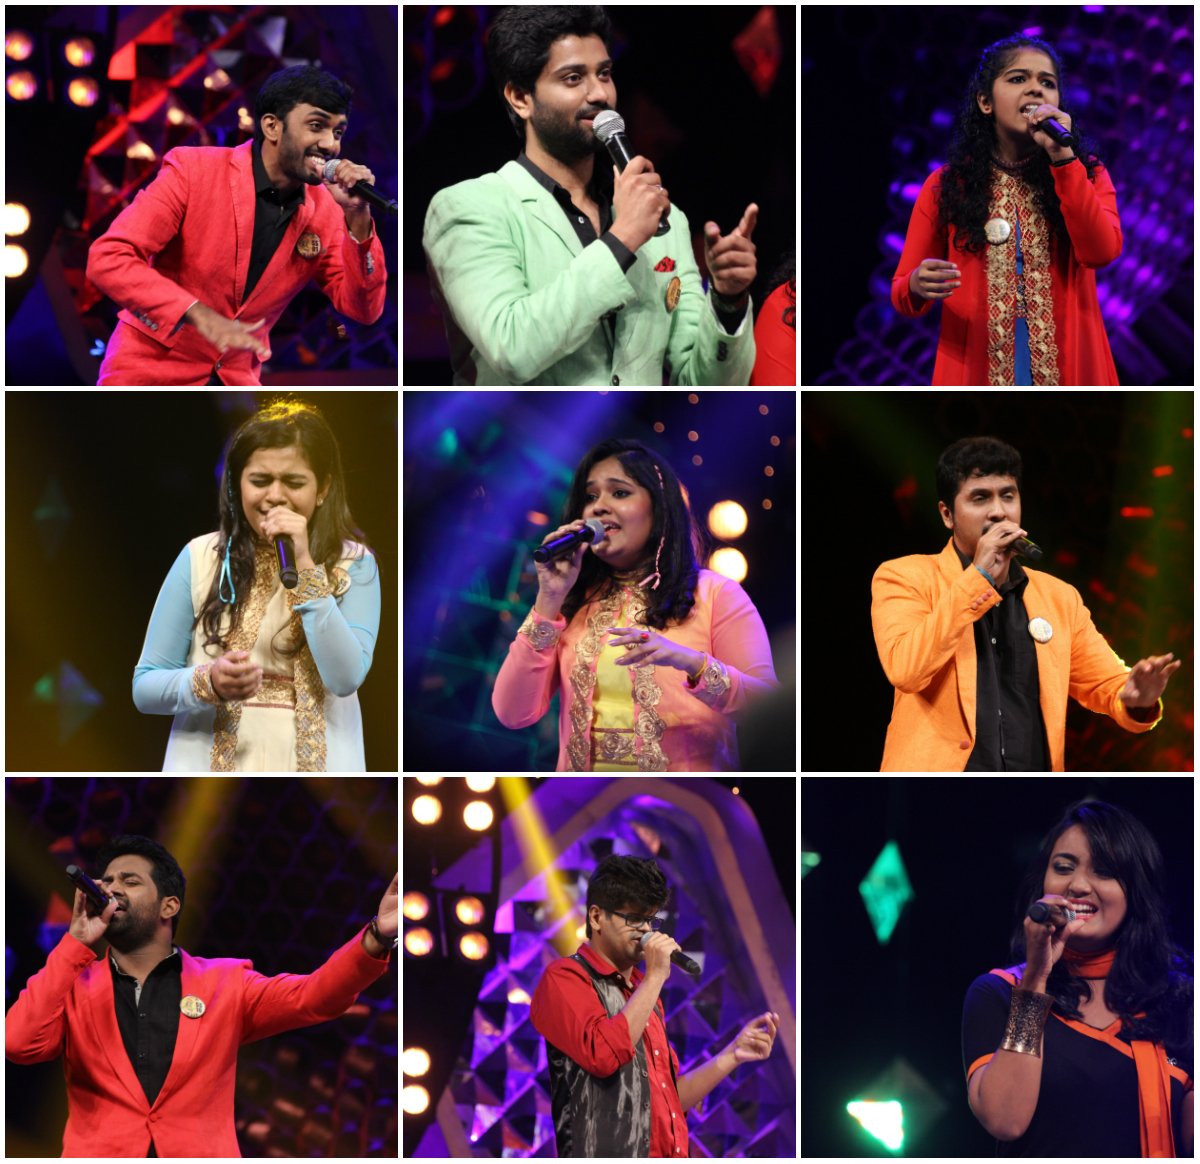 Winners Of Airtel Super Singer 5 Wild Card Round Result See more ideas about female singers, singer, female. winners of airtel super singer 5 wild